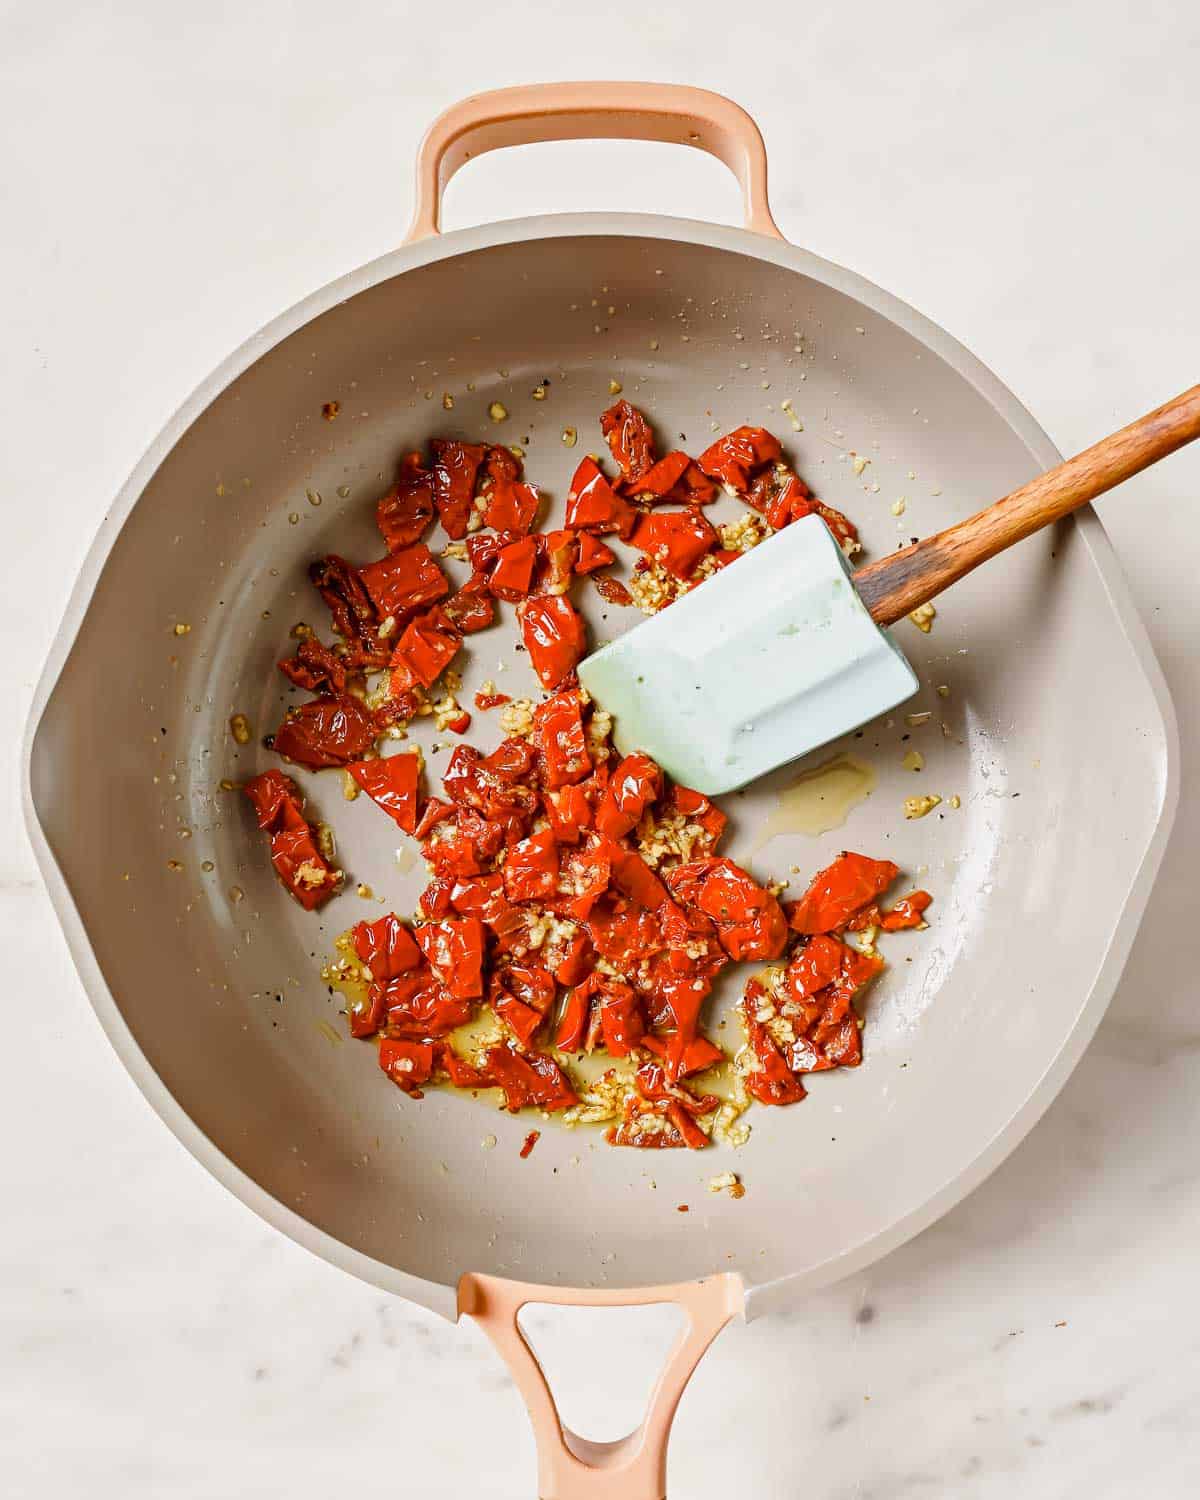 Diced sun-dried tomatoes being sautéed in a pot with a wooden spatula.